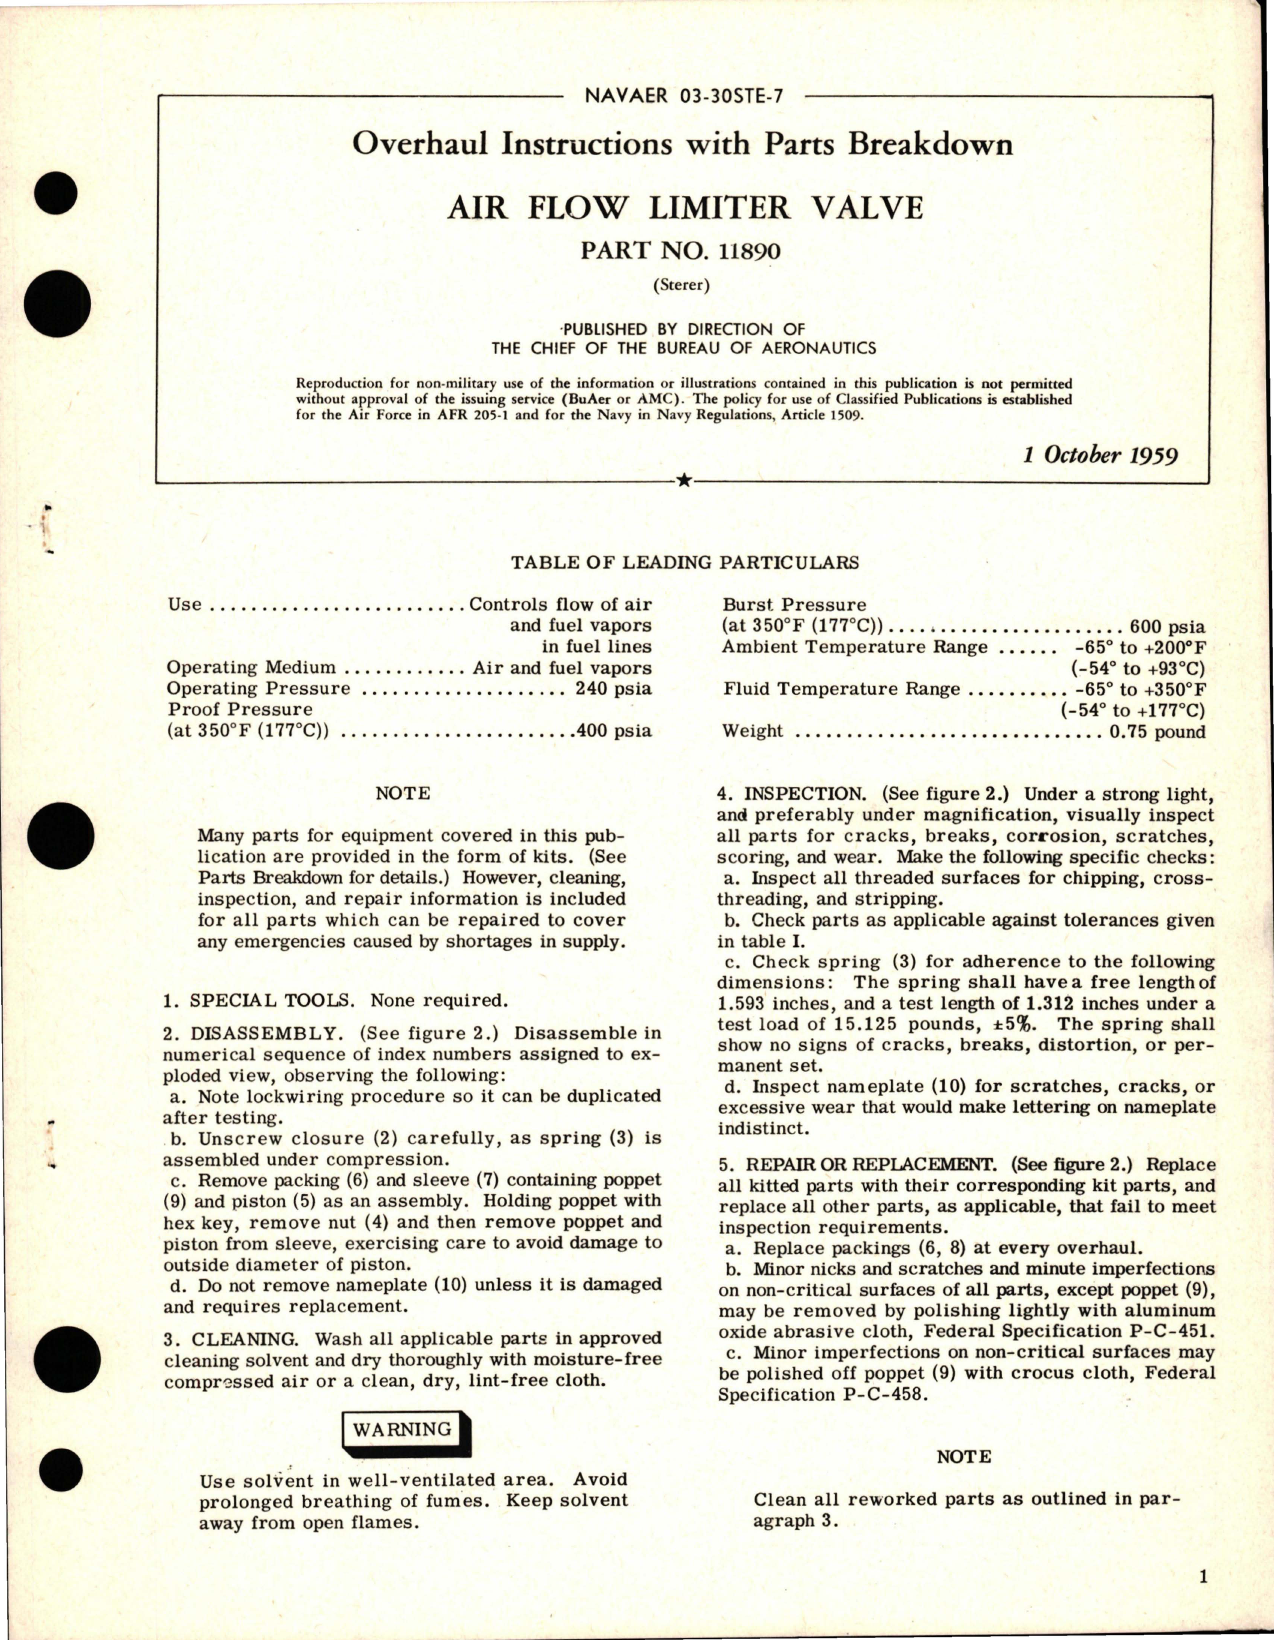 Sample page 1 from AirCorps Library document: Overhaul Instructions with Parts Breakdown for Air Flow Limiter Valve - Part 11890